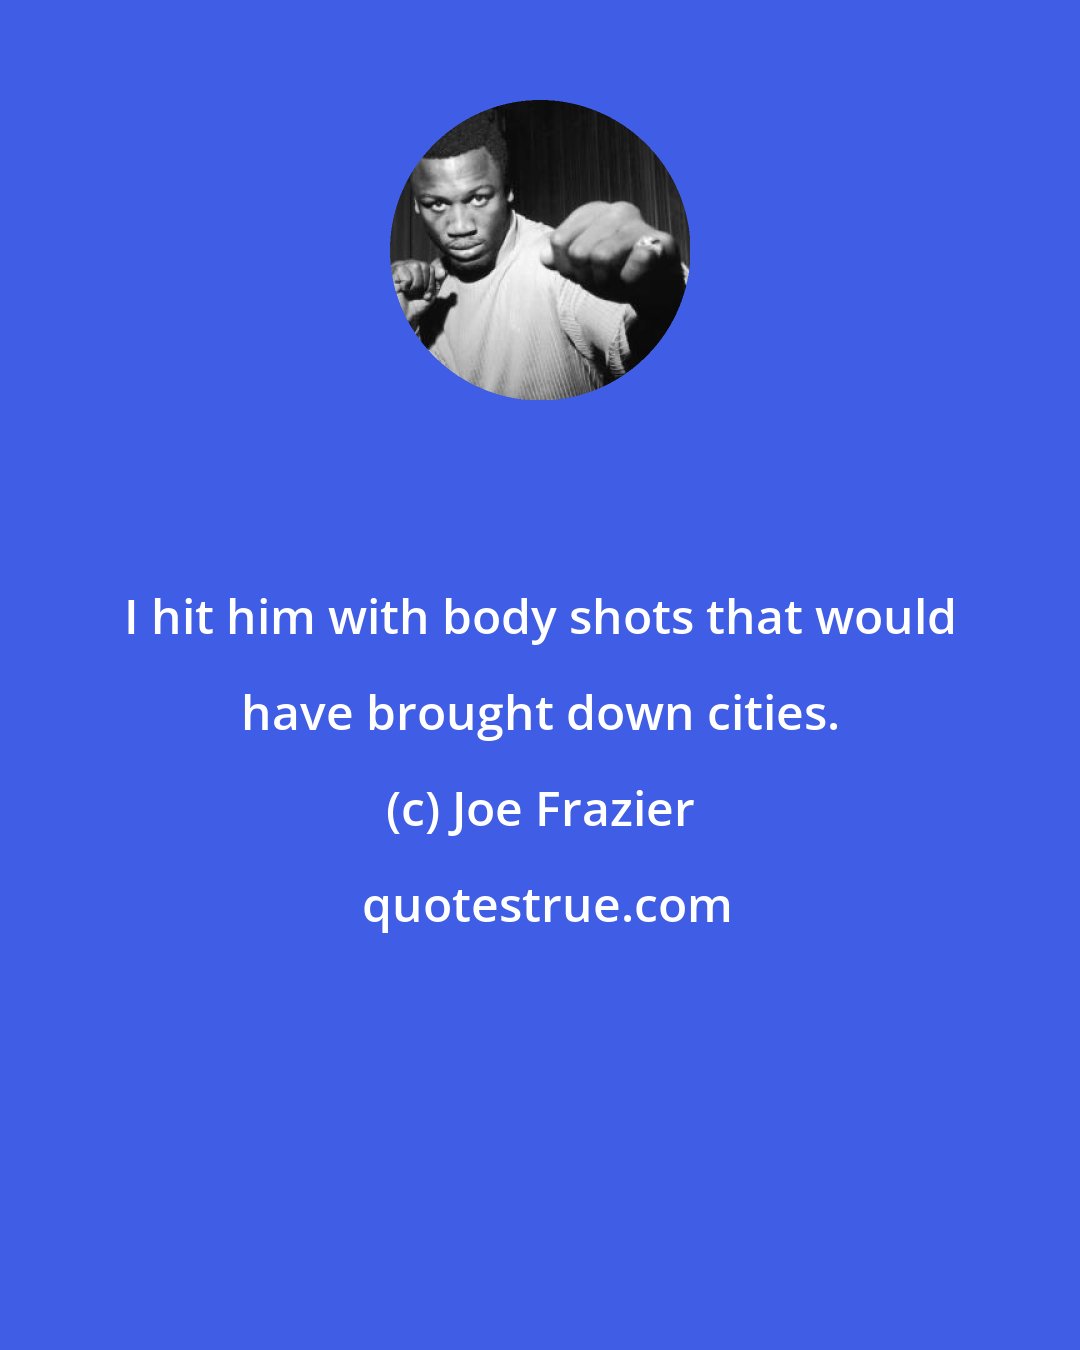 Joe Frazier: I hit him with body shots that would have brought down cities.